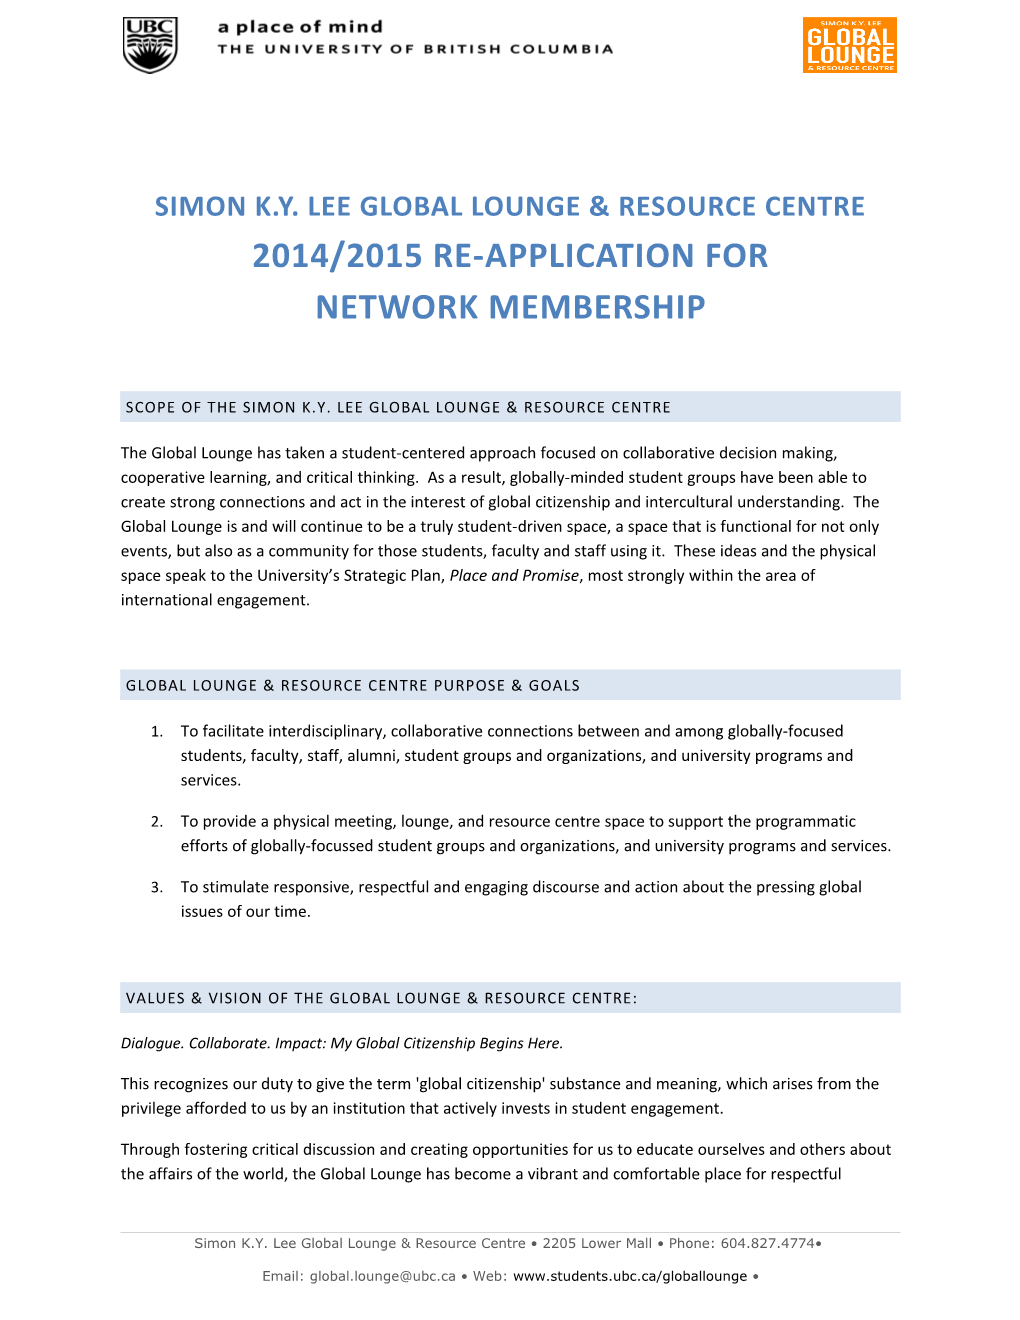 Scope of the Simon K.Y. Lee Global Lounge & Resource Centre